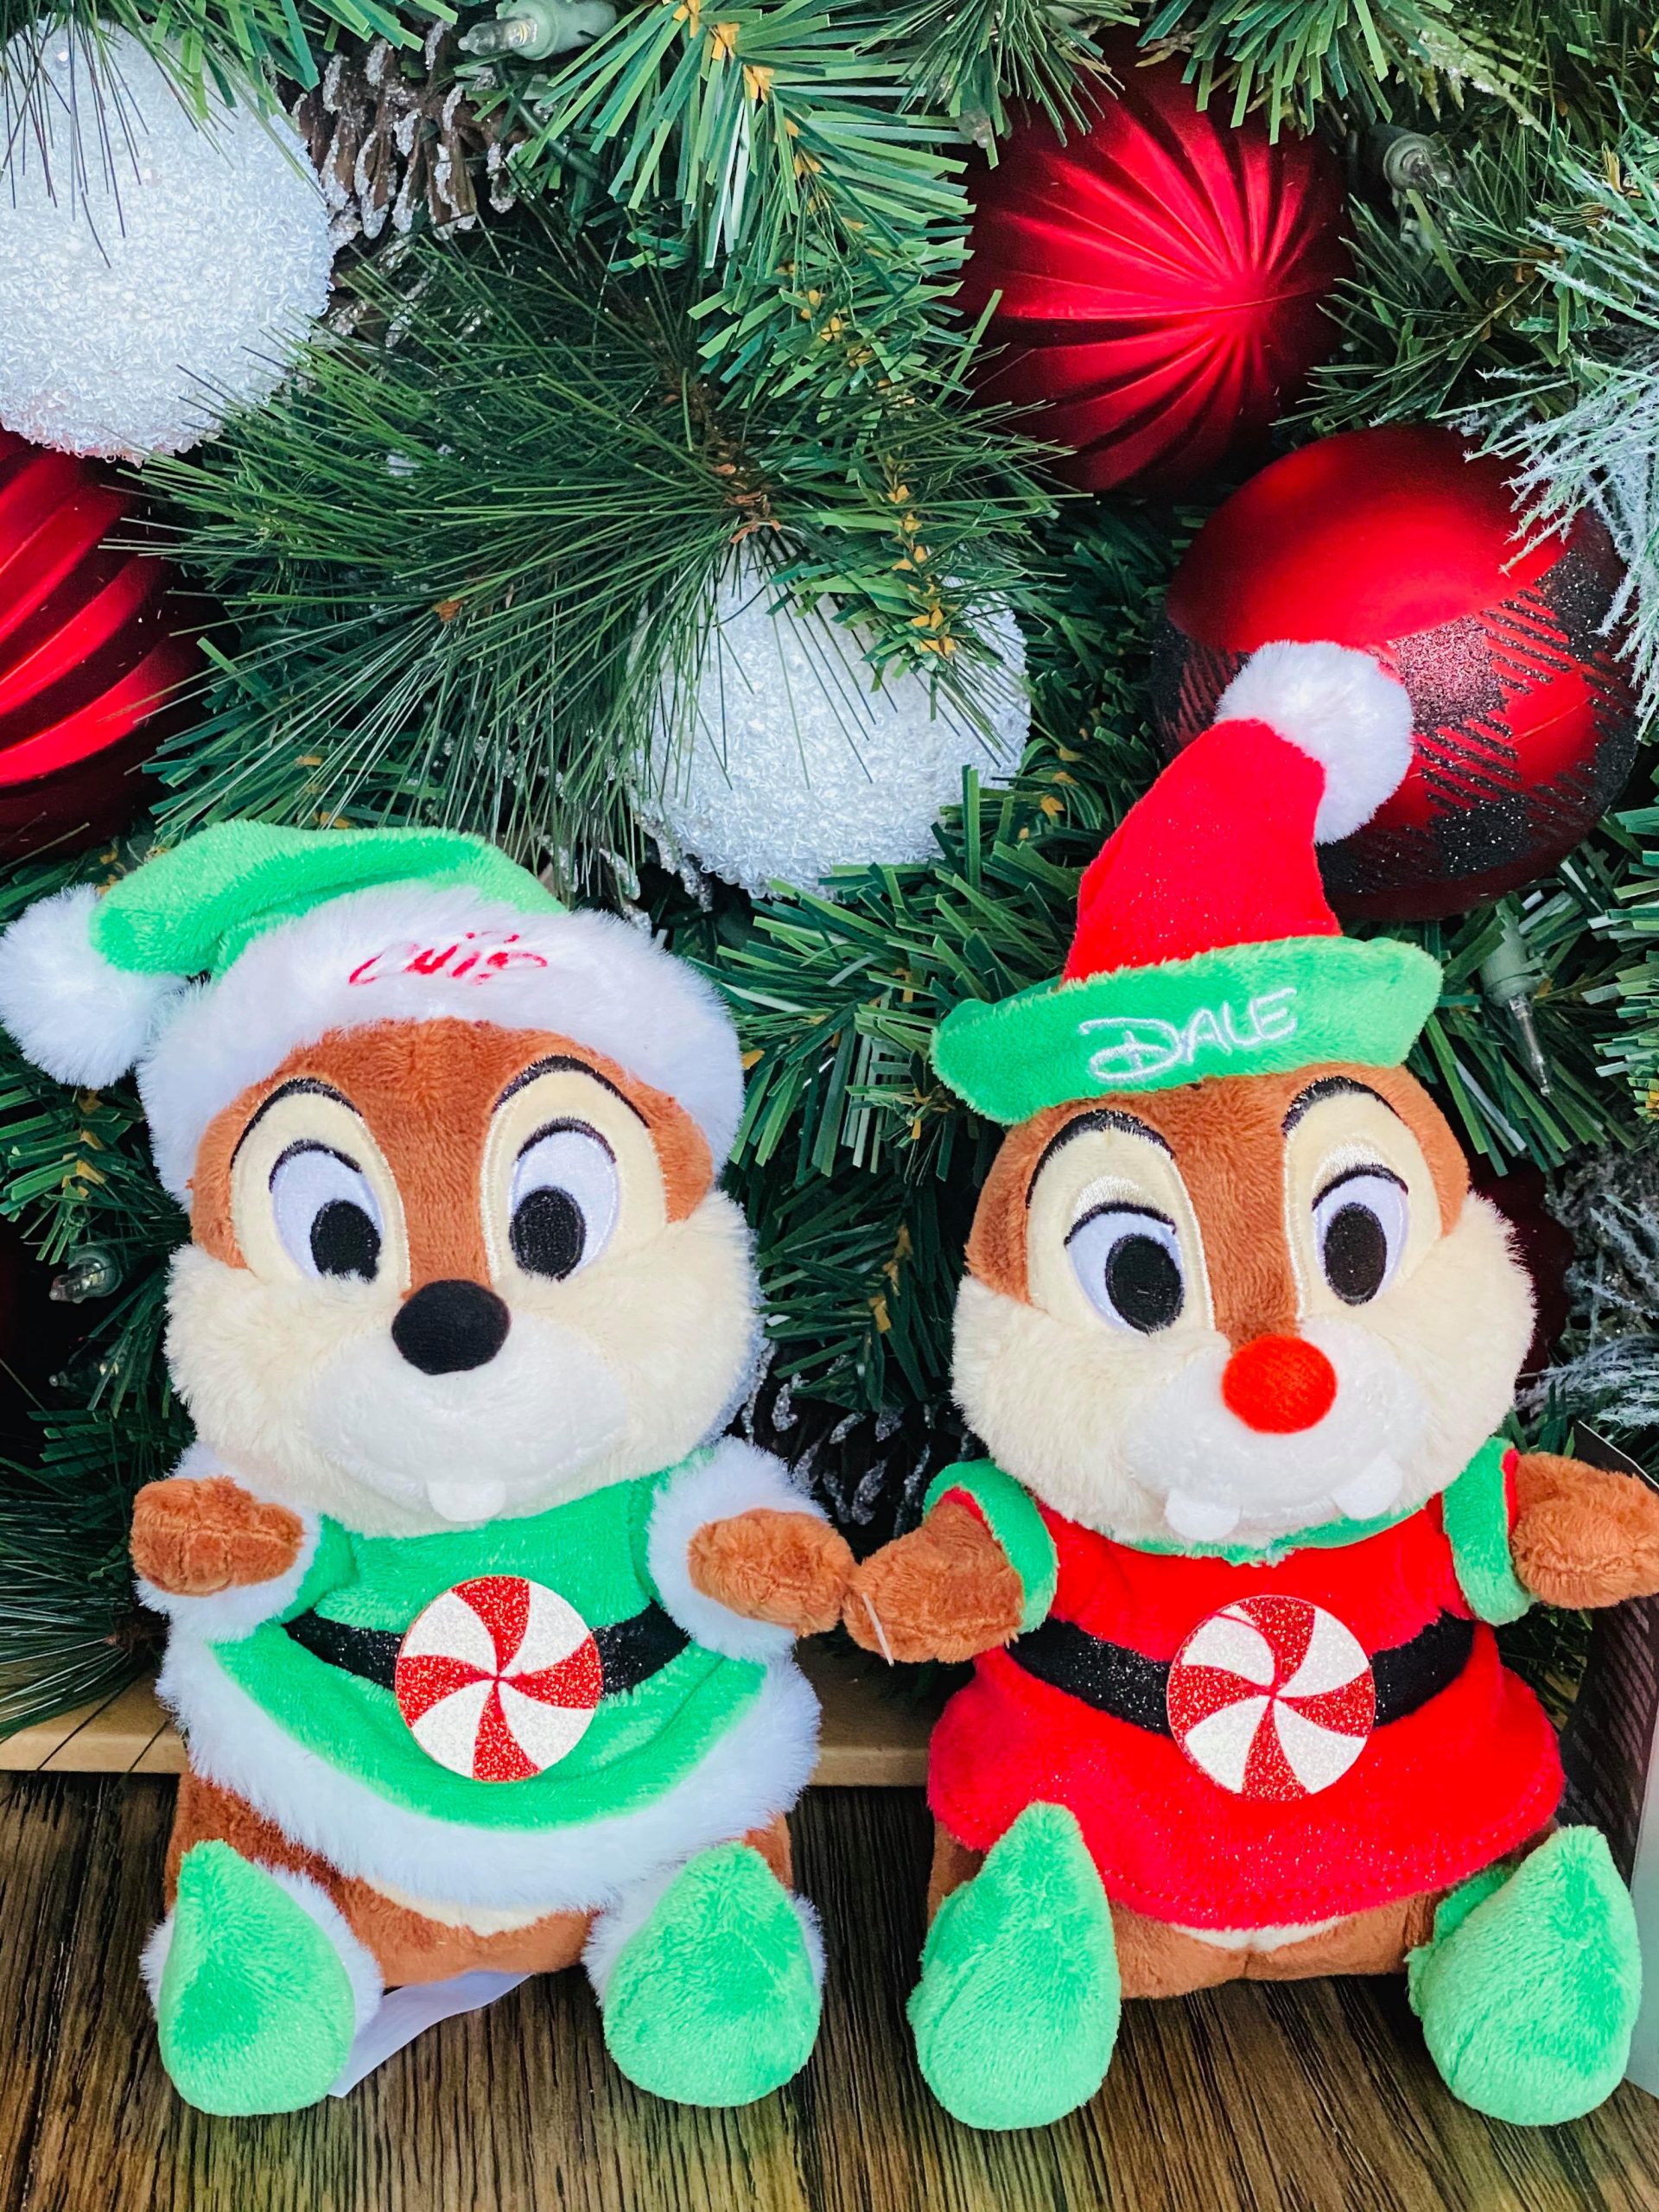 chip and dale holiday plush